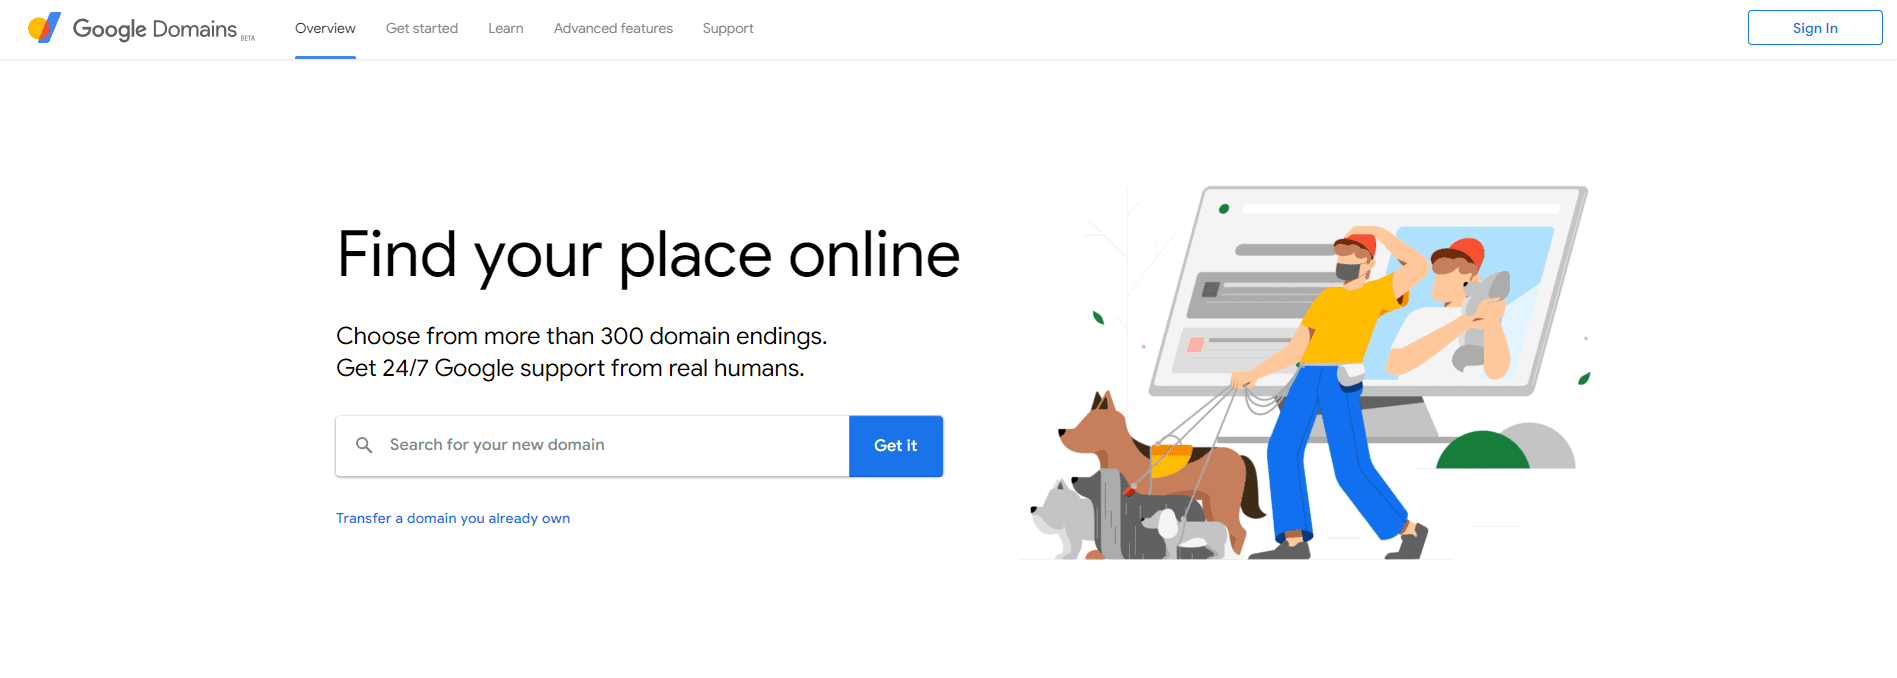 Screenshot of the Google Domains homepage featuring a header "how to buy a domain" and an illustration of two people working on a computer, with a dog next to them.